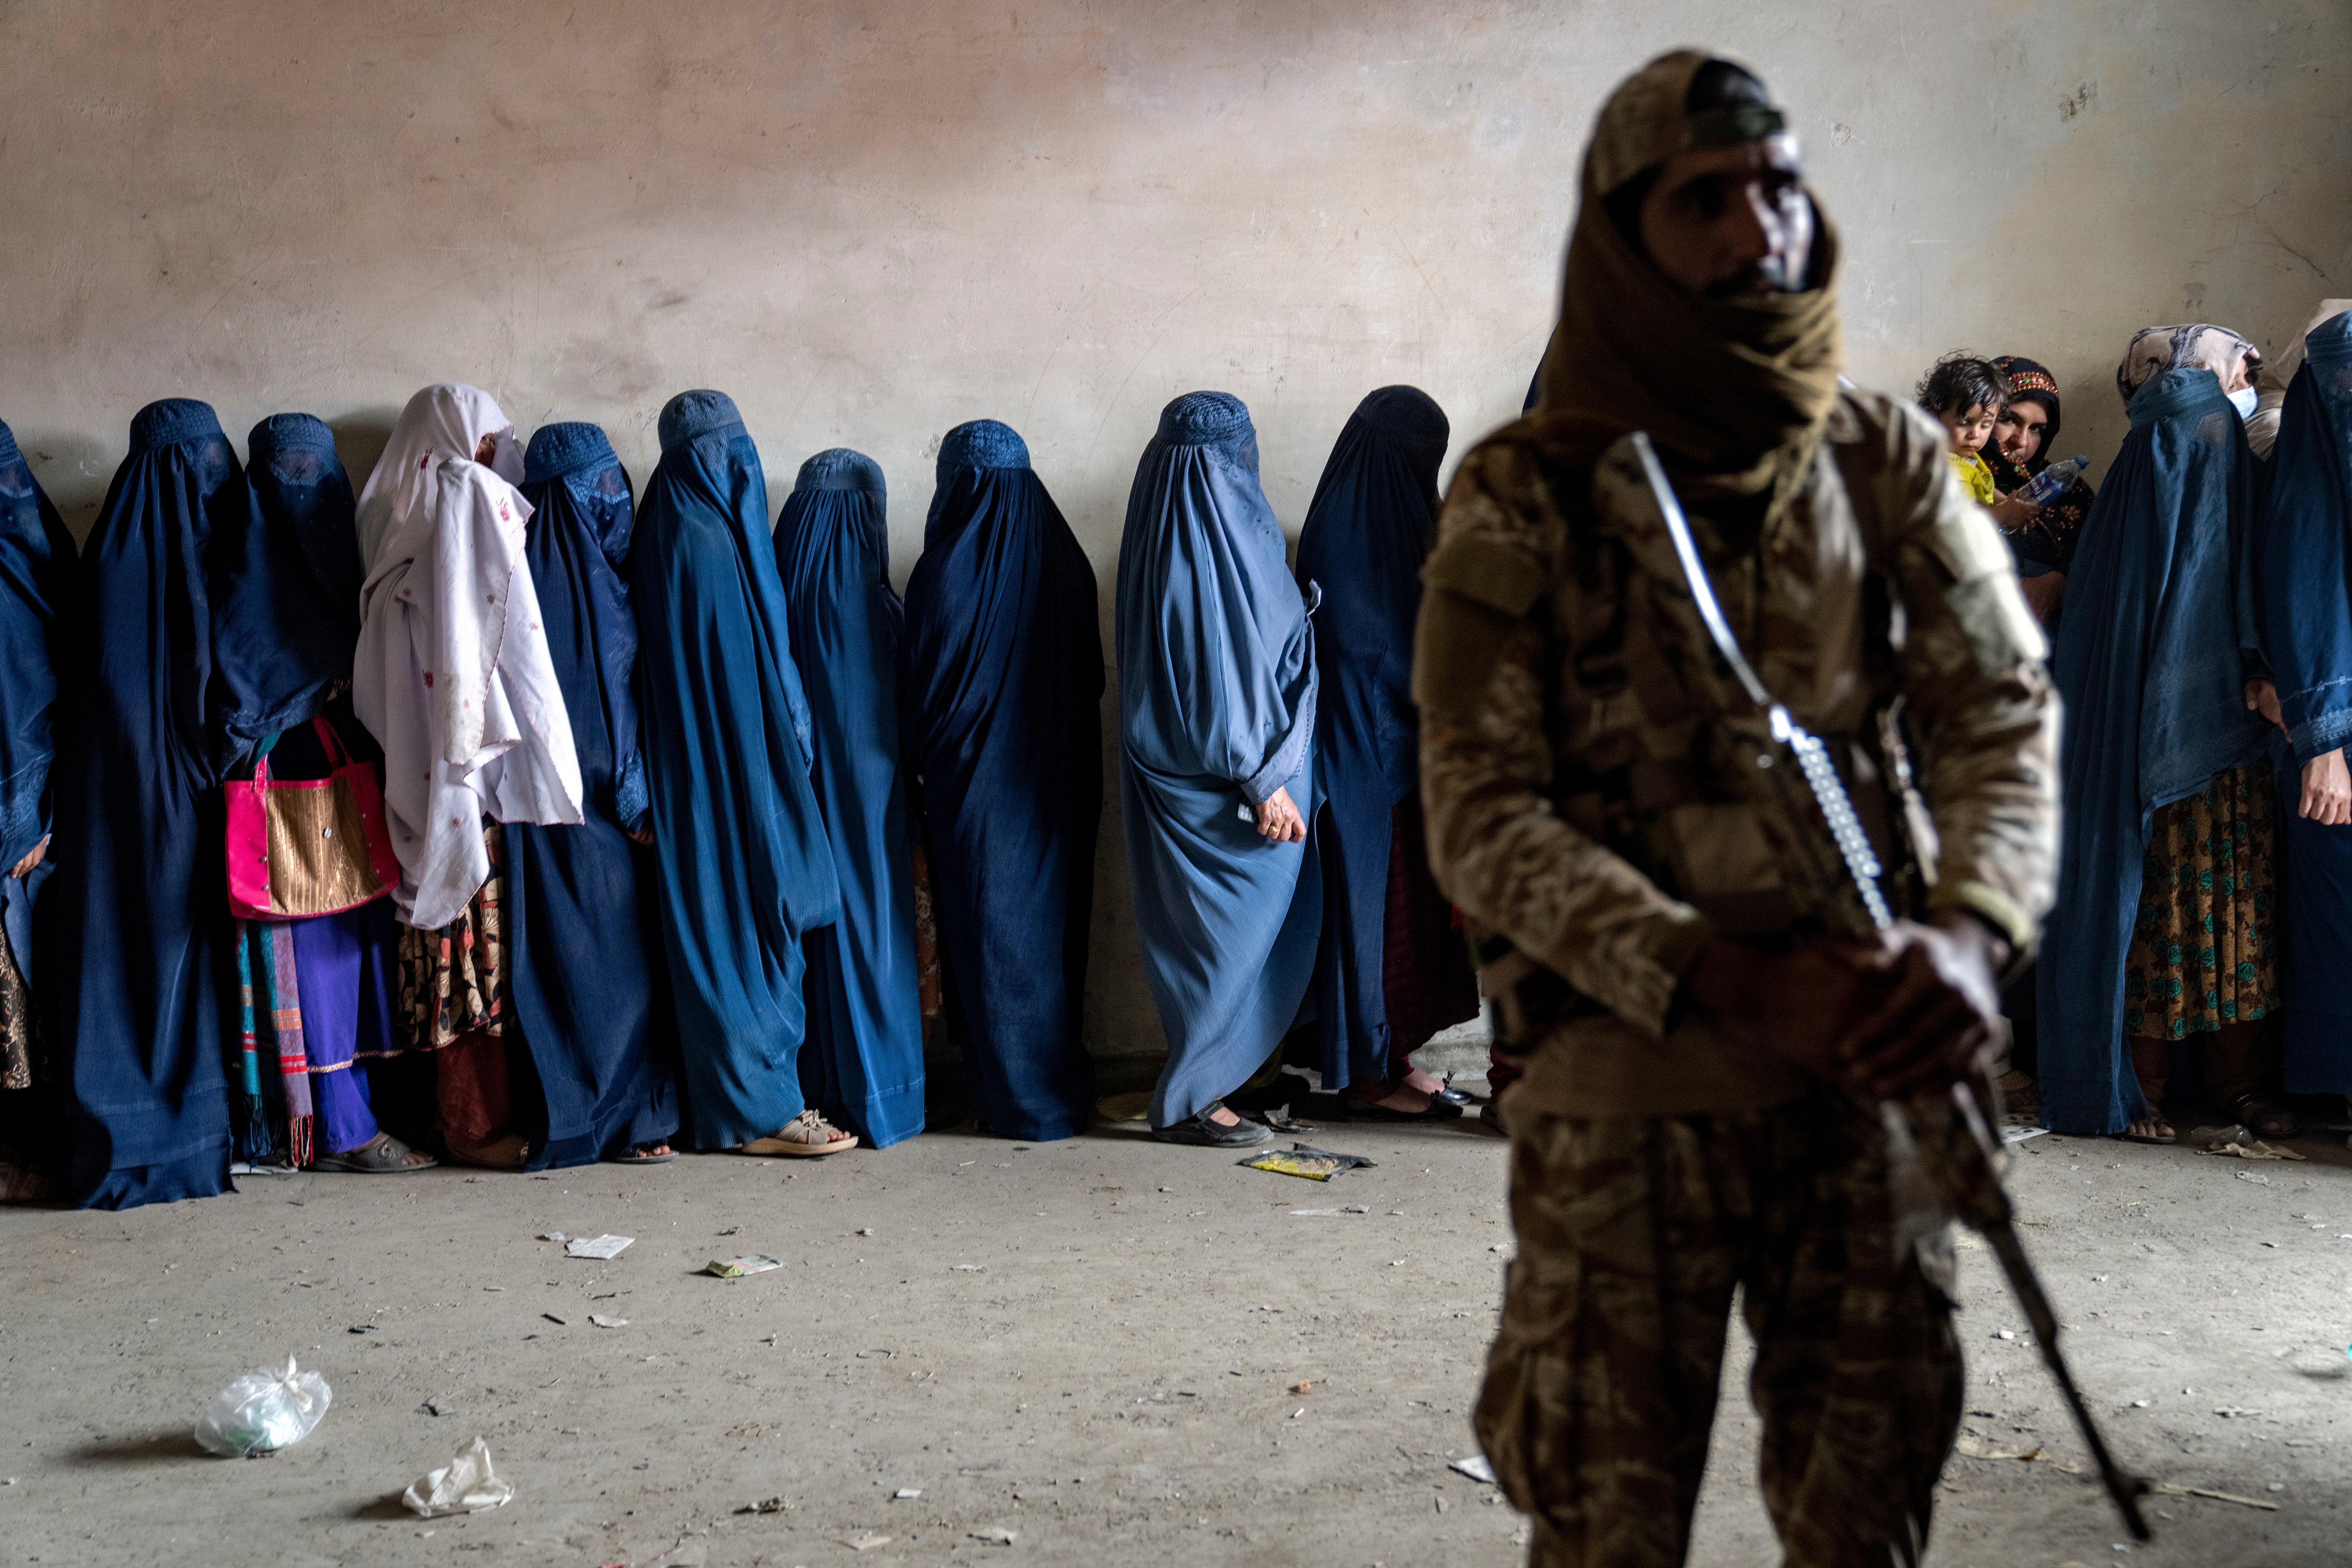 A Taliban fighter stands guard as women wait to receive food rations distributed by a humanitarian aid group in Kabul in May